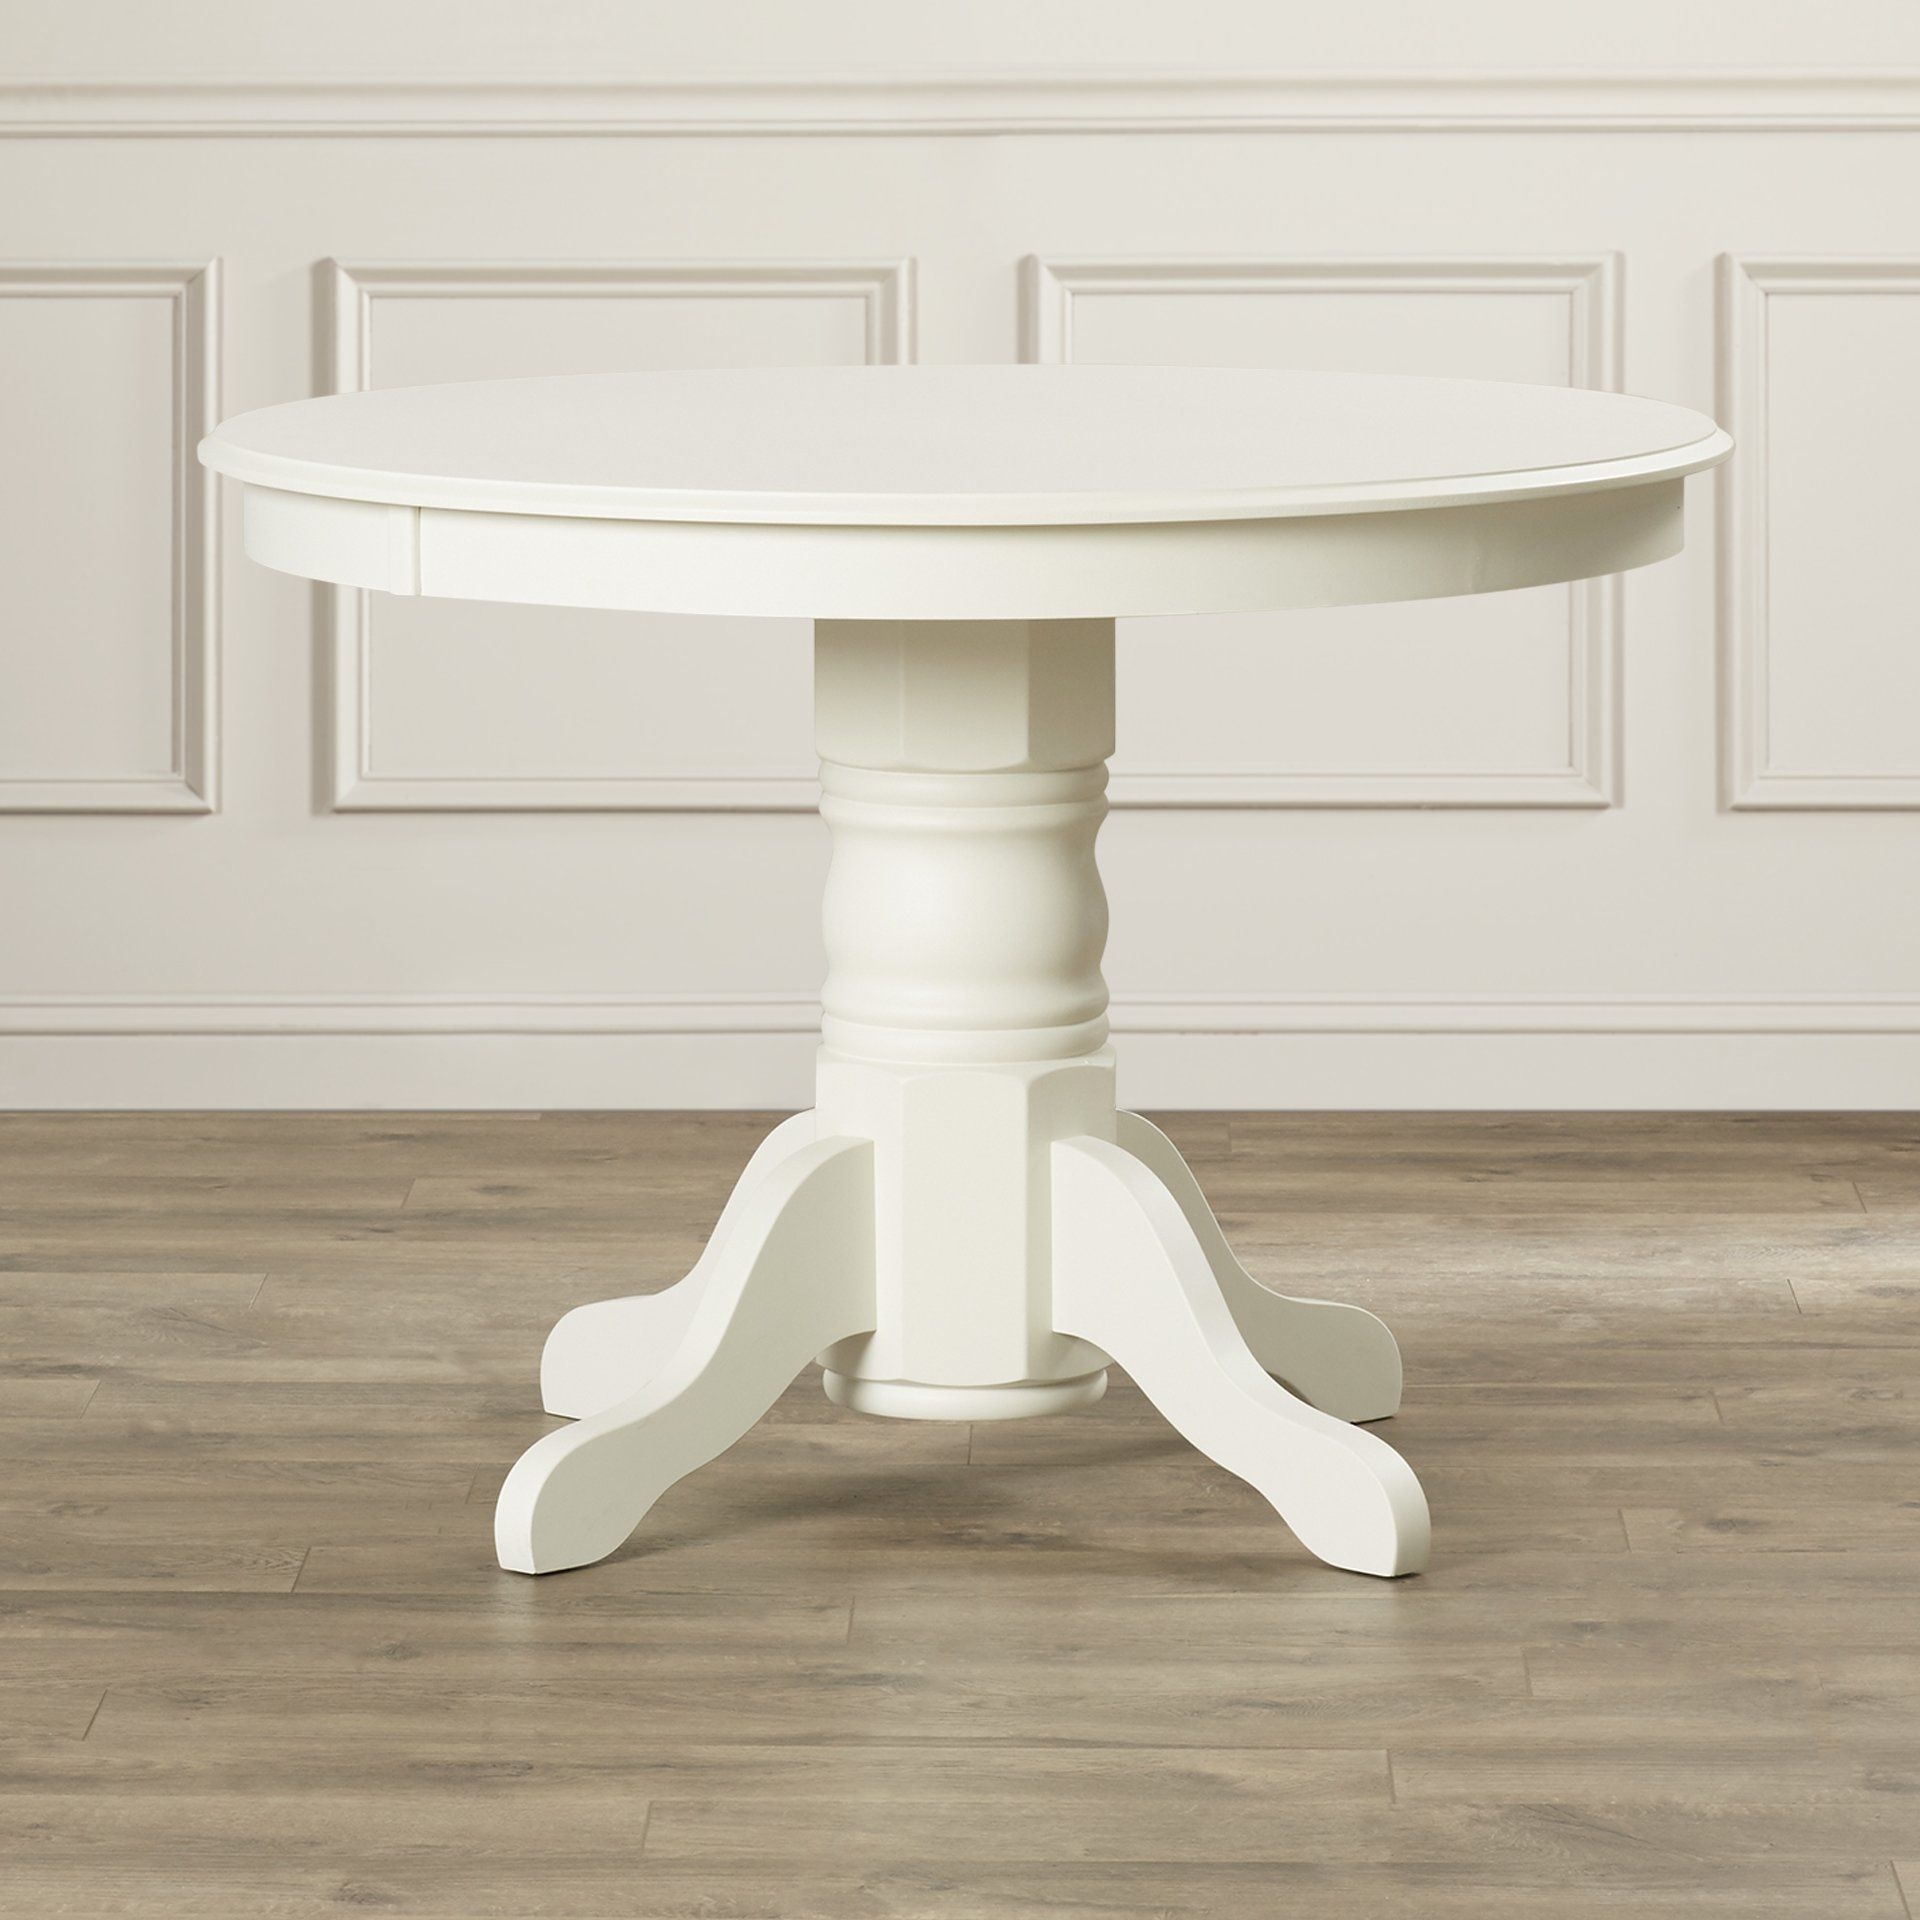 Round White Table Visualhunt, White Round Dining Table With Leaves